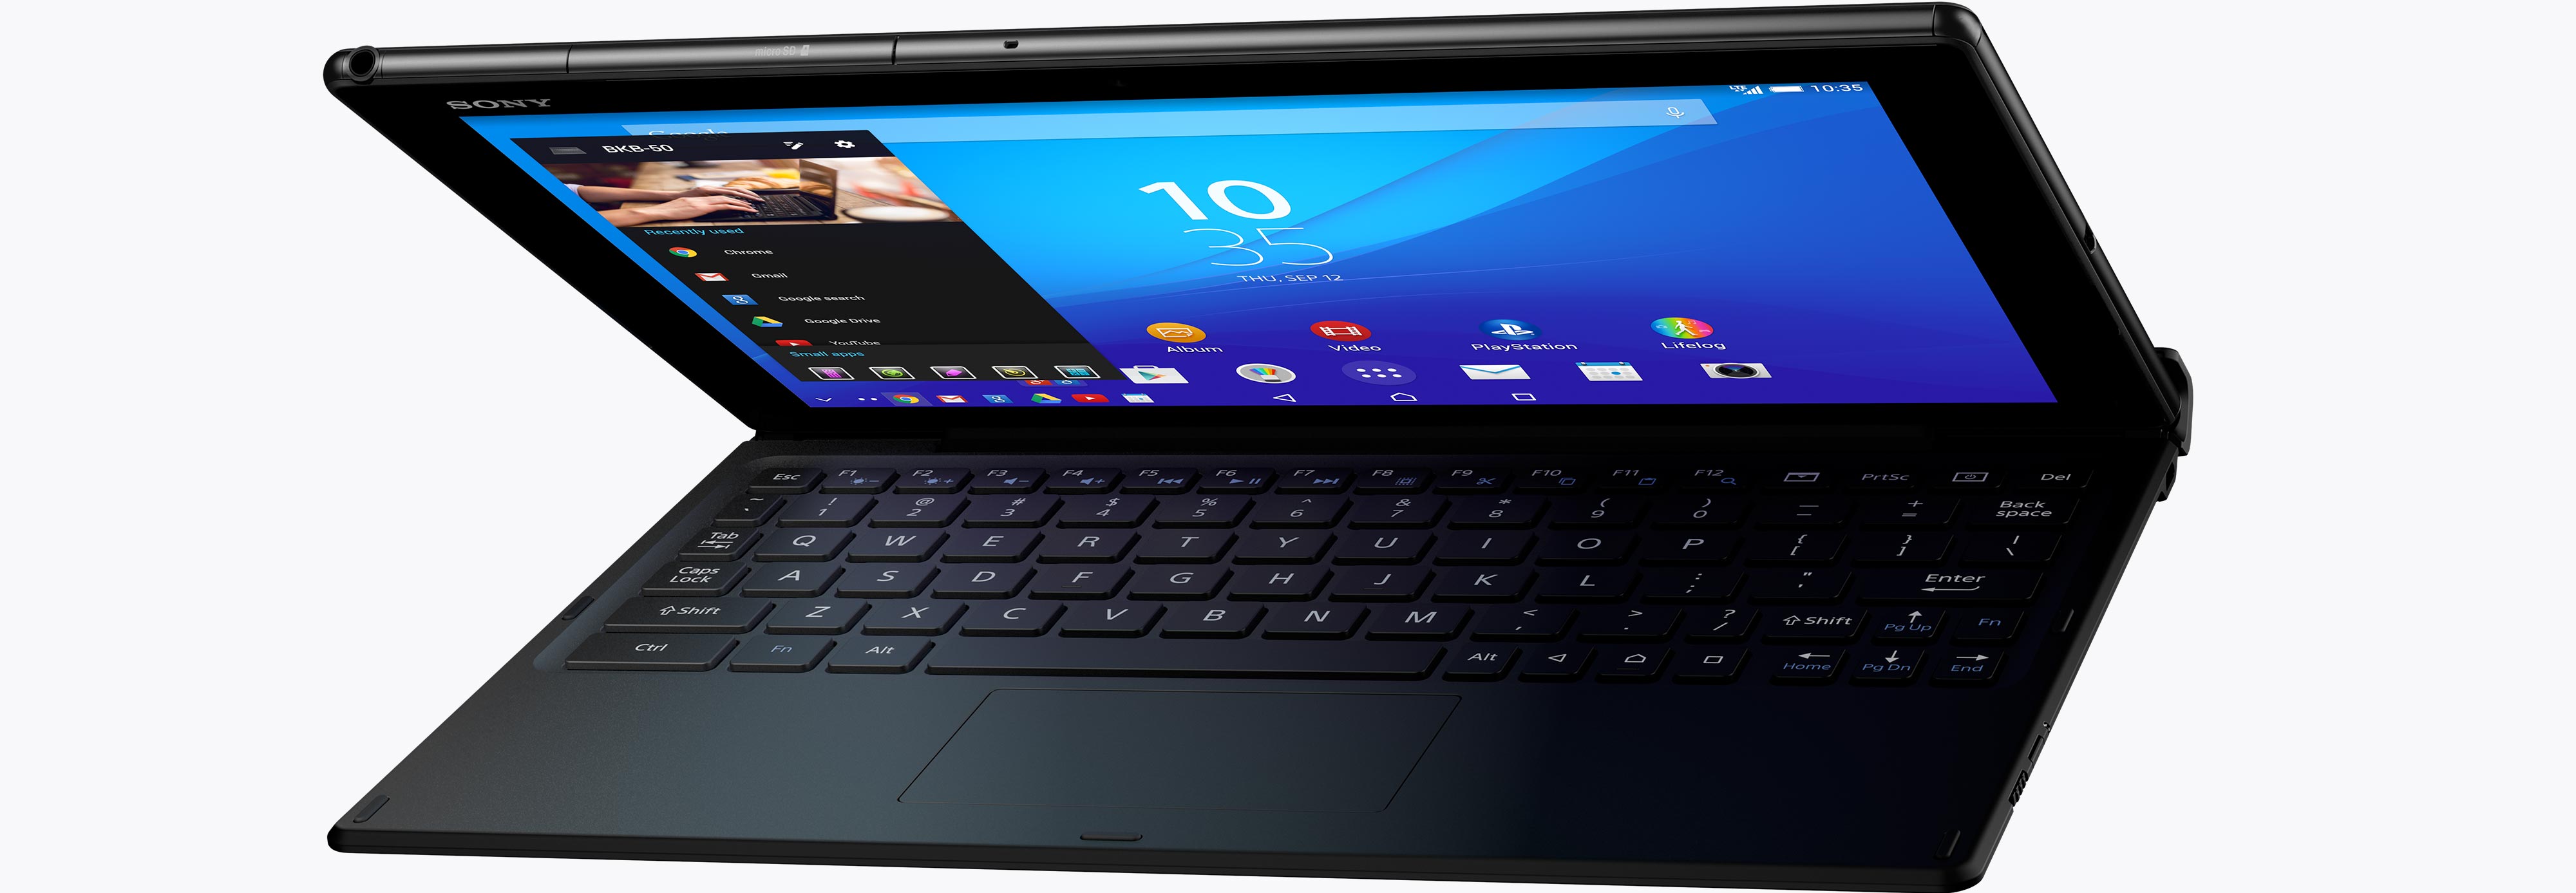 Sony BKB50 Bluetooth Keyboard turns the Xperia Z4 Tablet into a